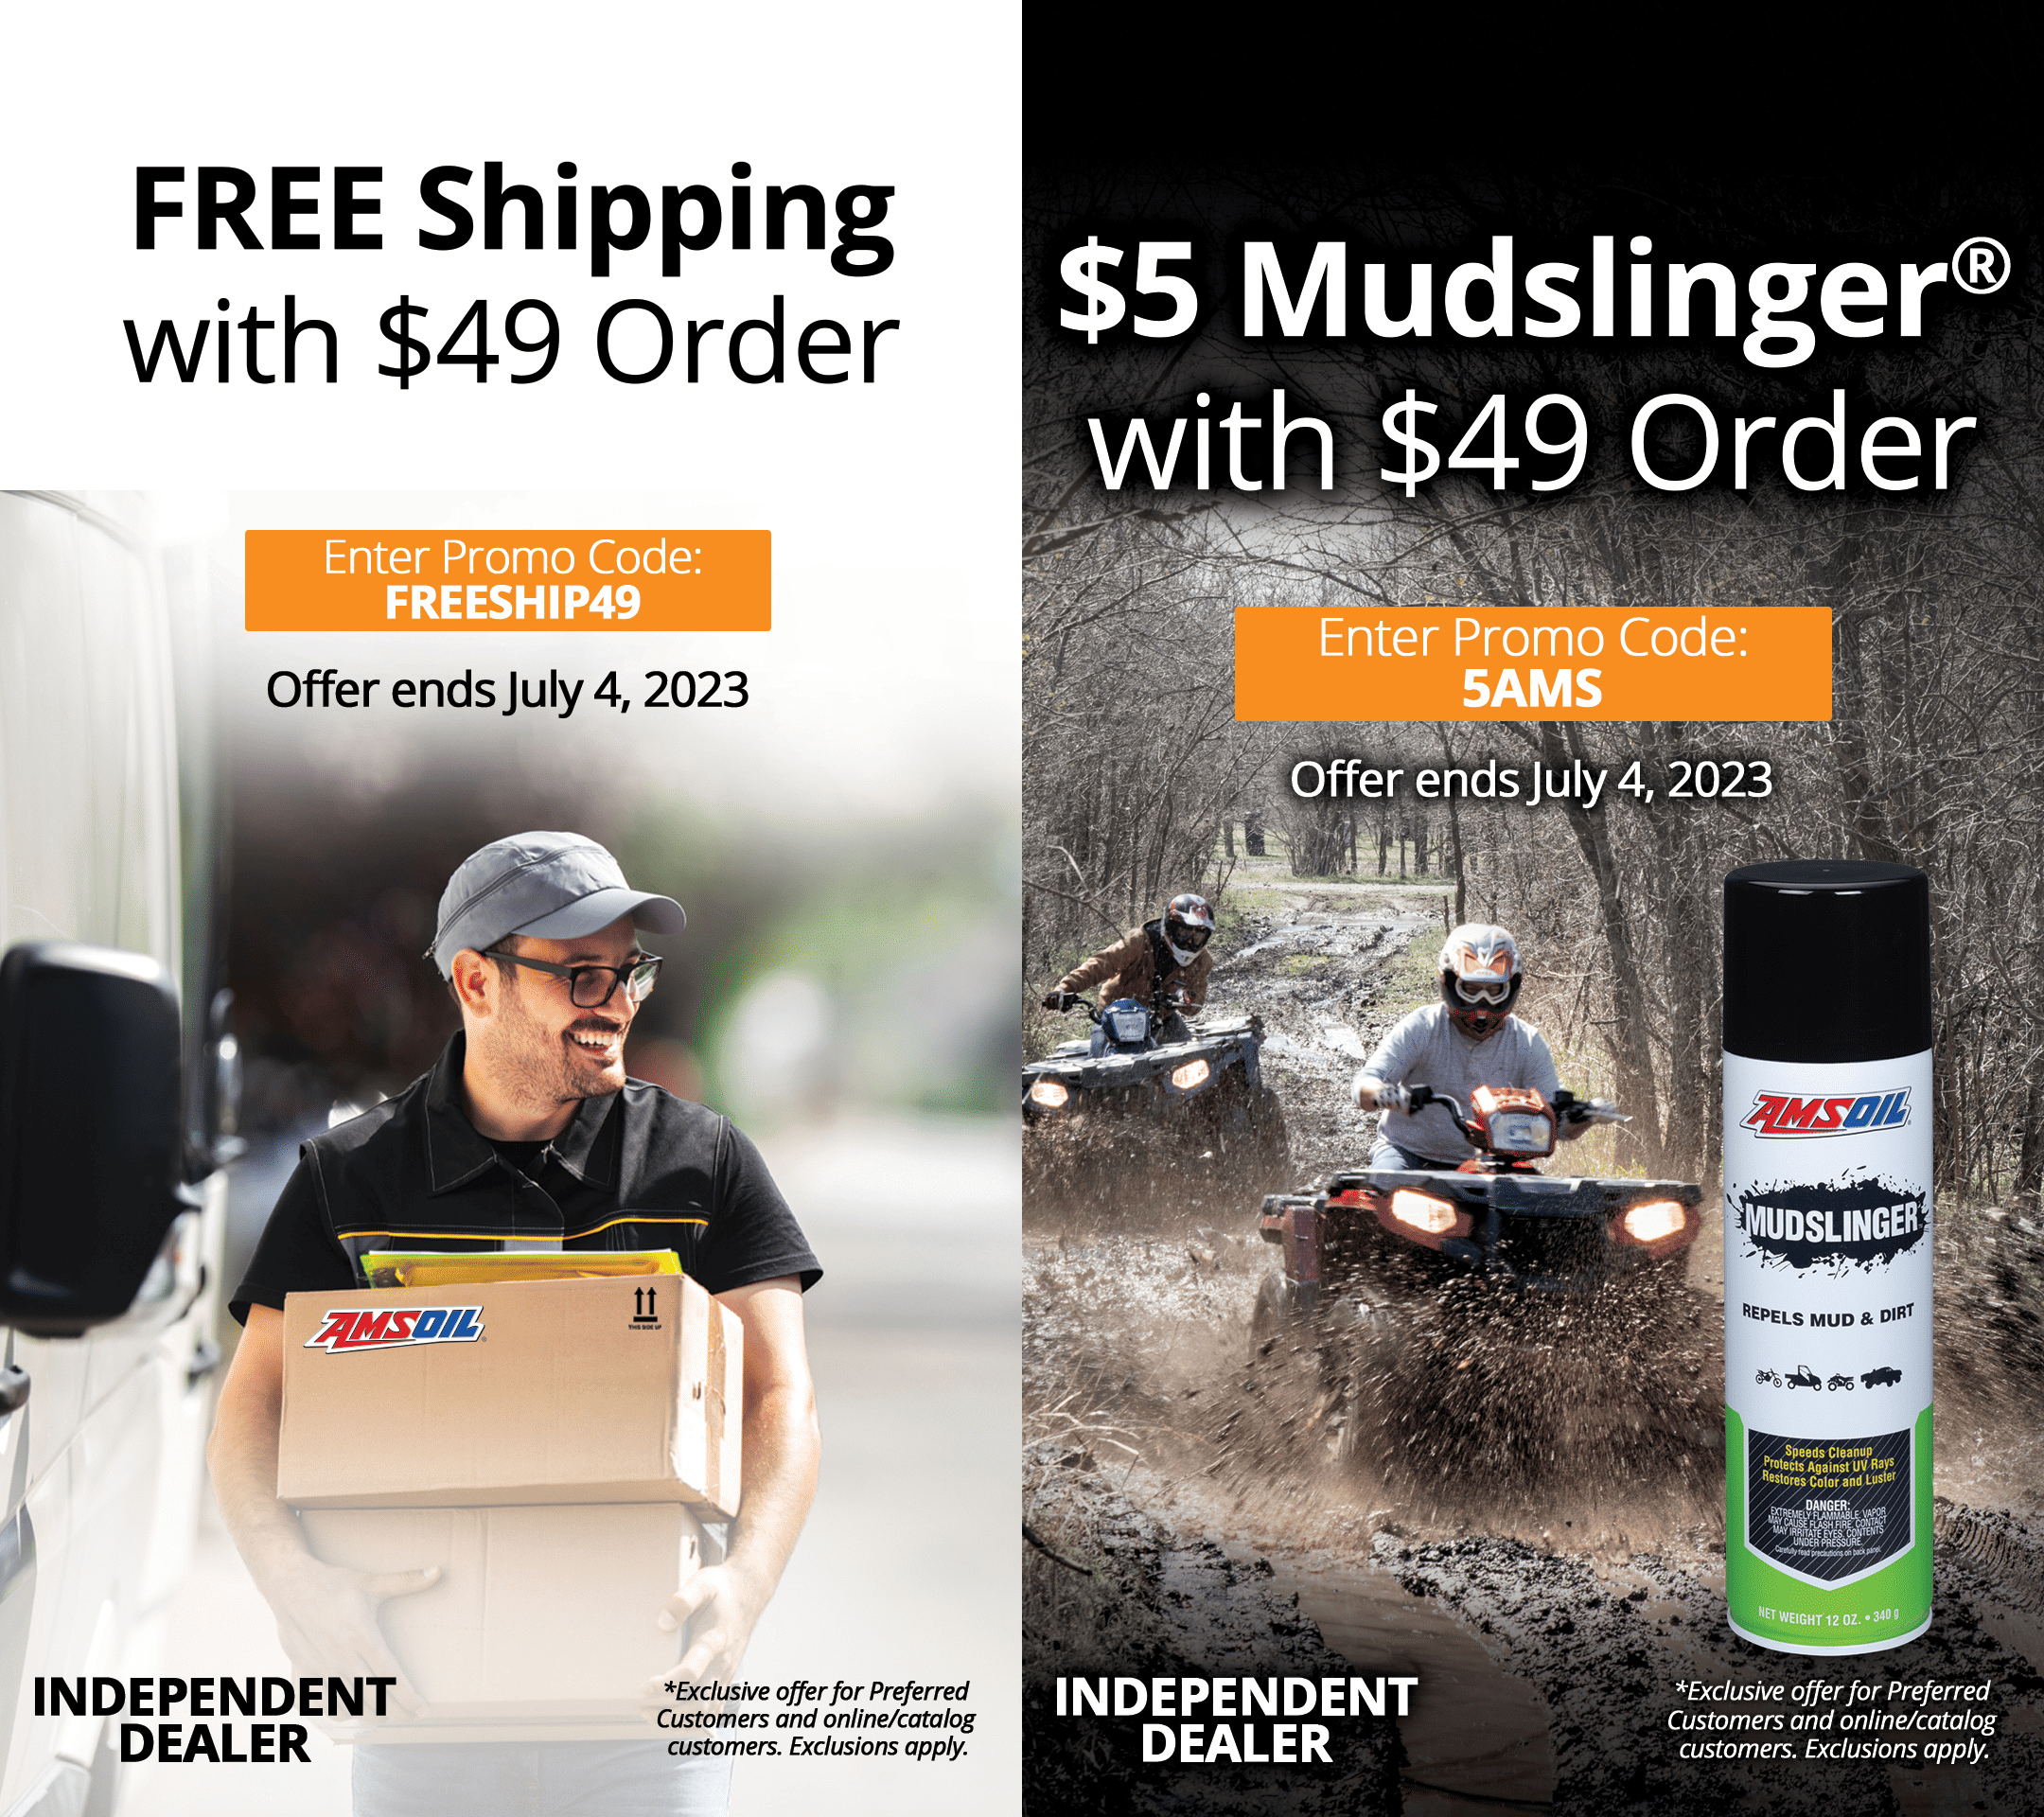 AMSOIL Free shipping and $5 12-oz. can of Mudslinger with $49 order